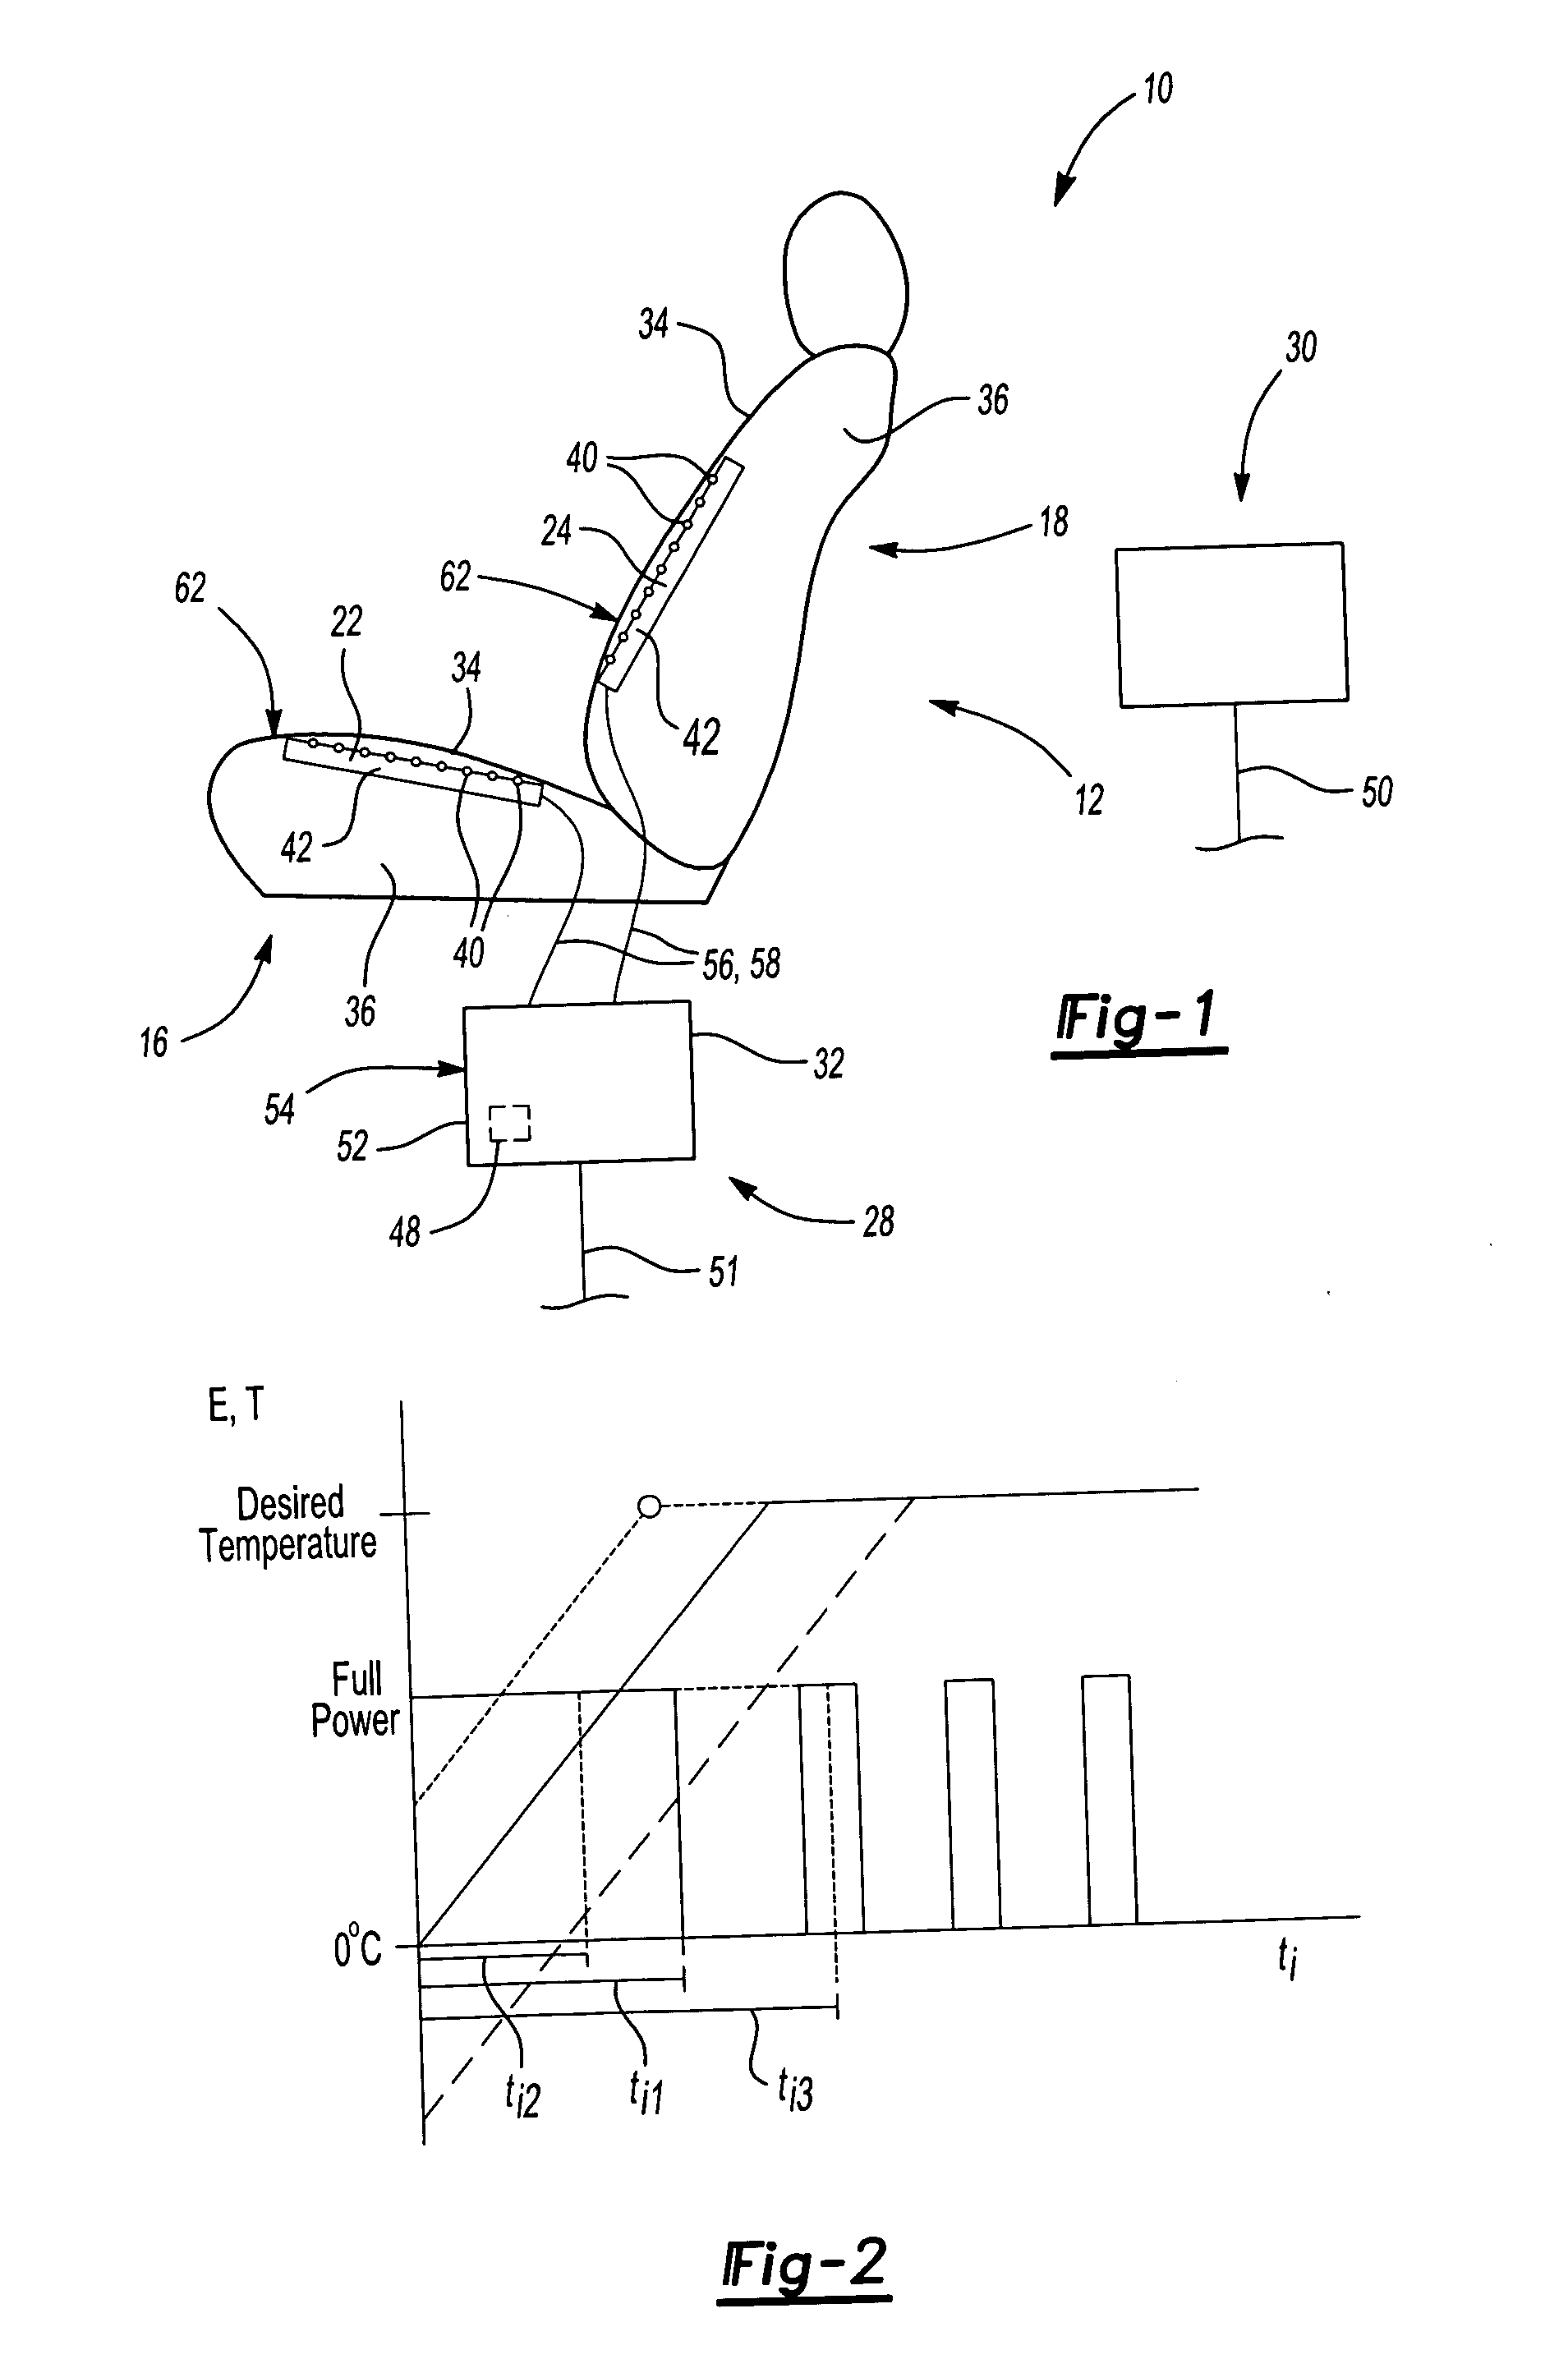 Temperature conditioned assembly having a controller in communication with a temperature sensor